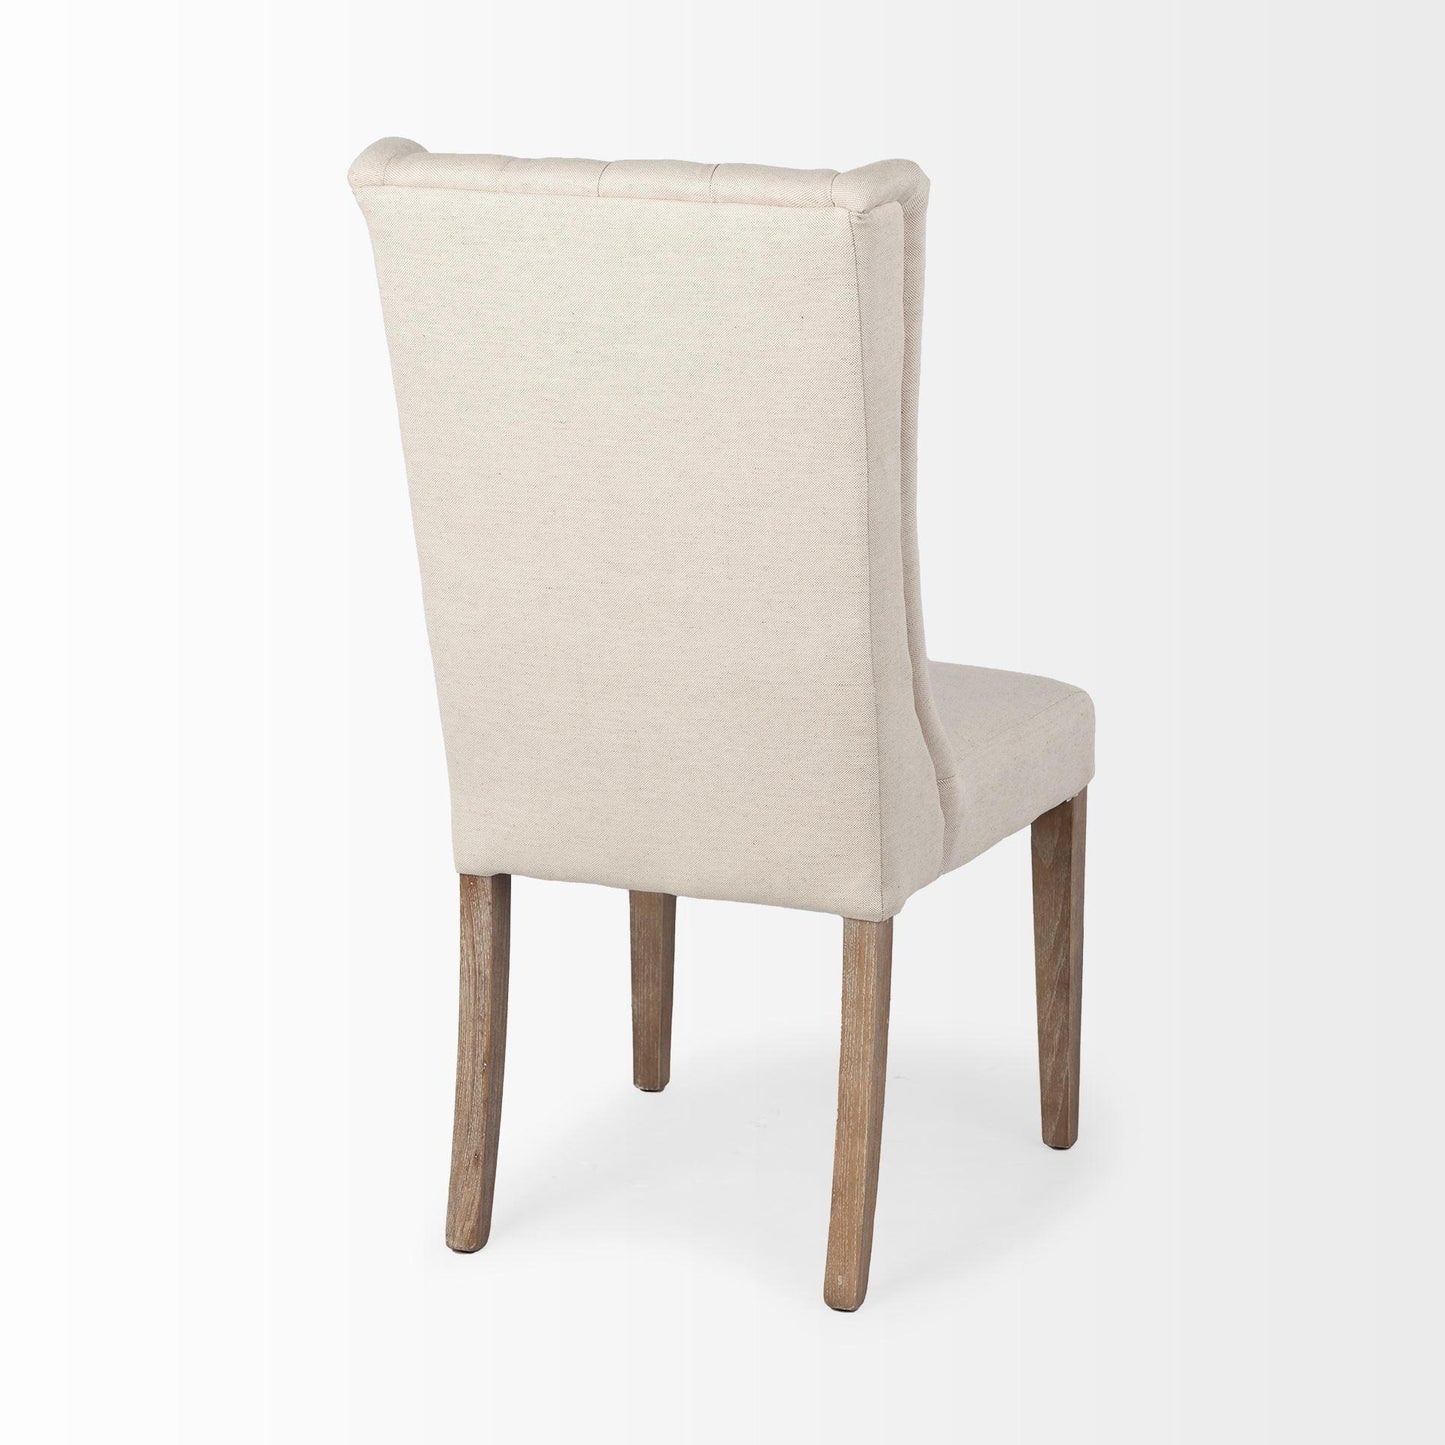 Mackenzie I Cream Plush Linen Covering Ash Solid Wood Base Dining Chair